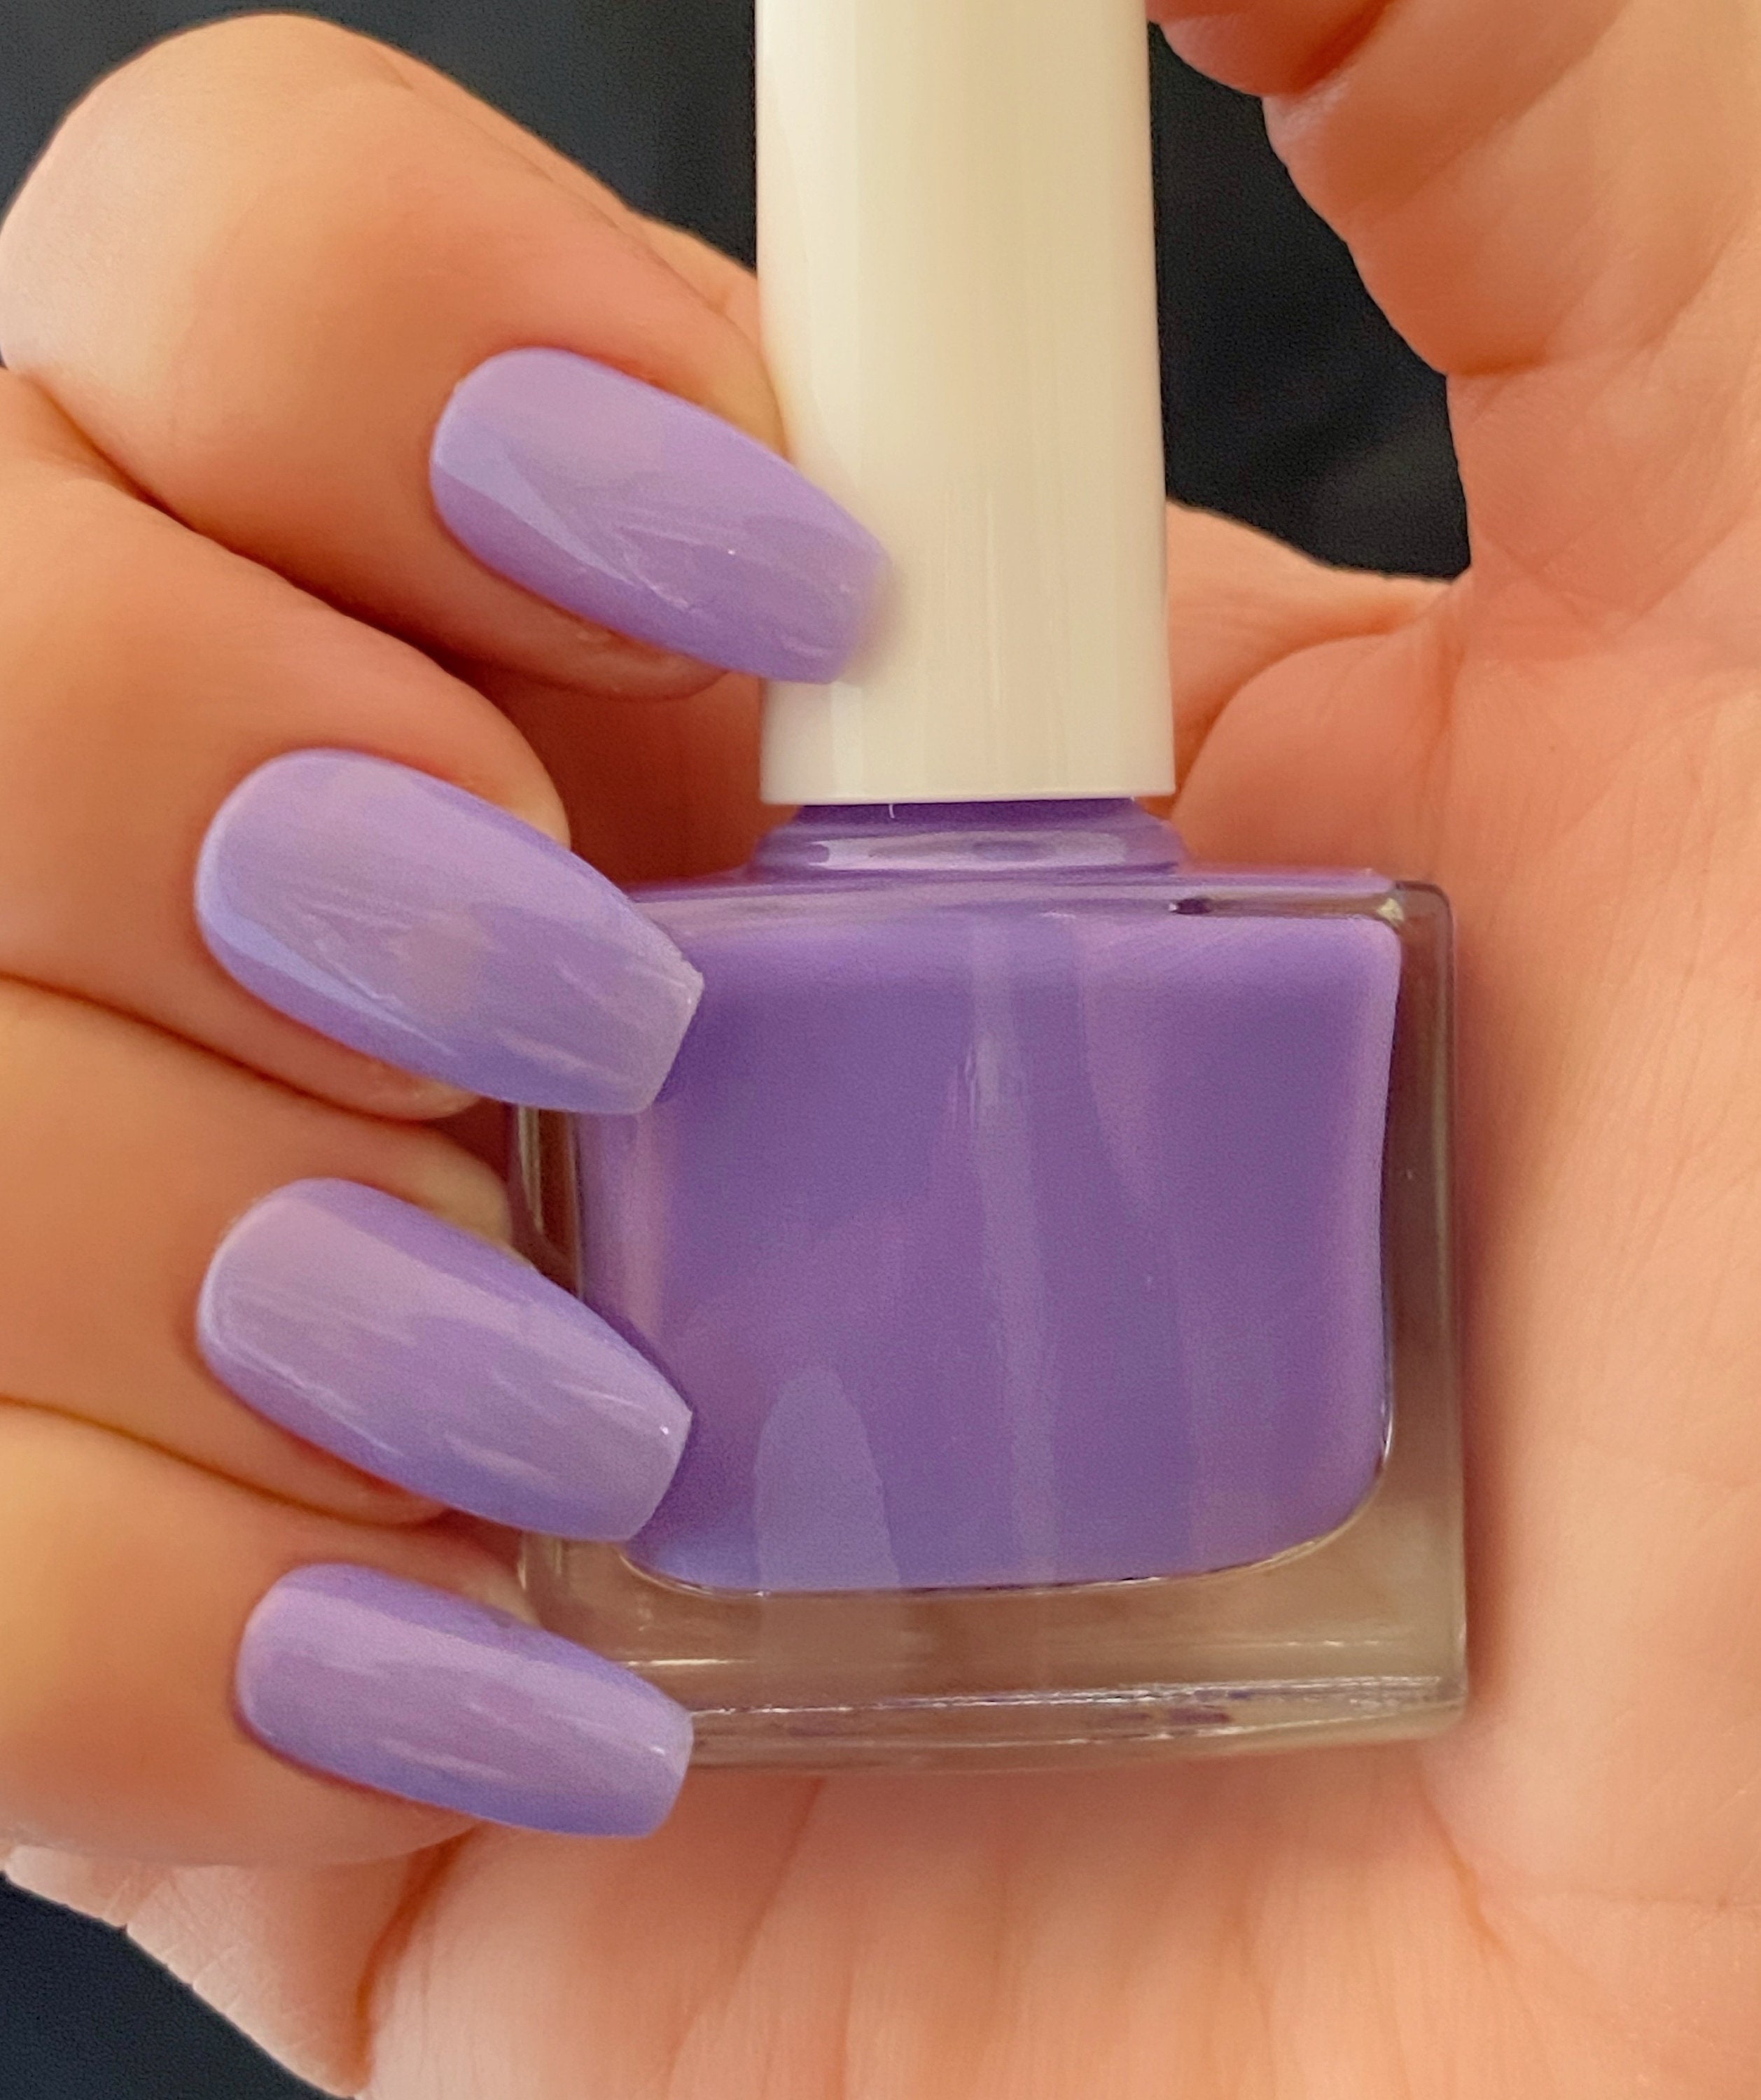 60+ Light Purple & Lavender Nail Designs to Try - The Mood Guide | Lavender  nails, Violet nails, Lilac nails